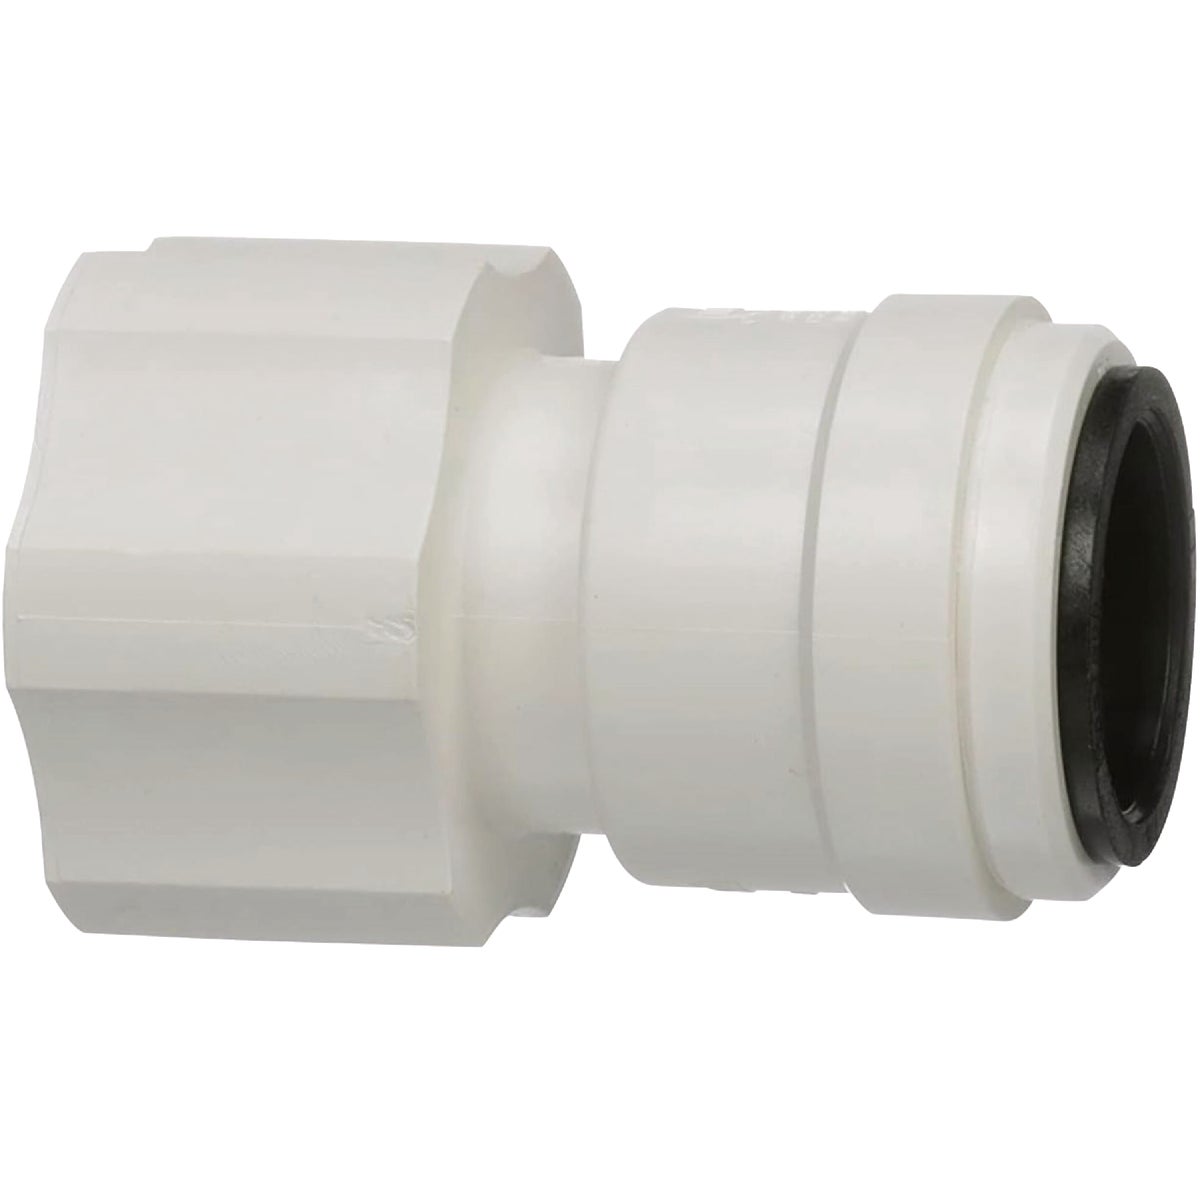 Watts Aqualock 3/4 In. CTS x 1 In. FPT Push-to-Connect Plastic Adapter